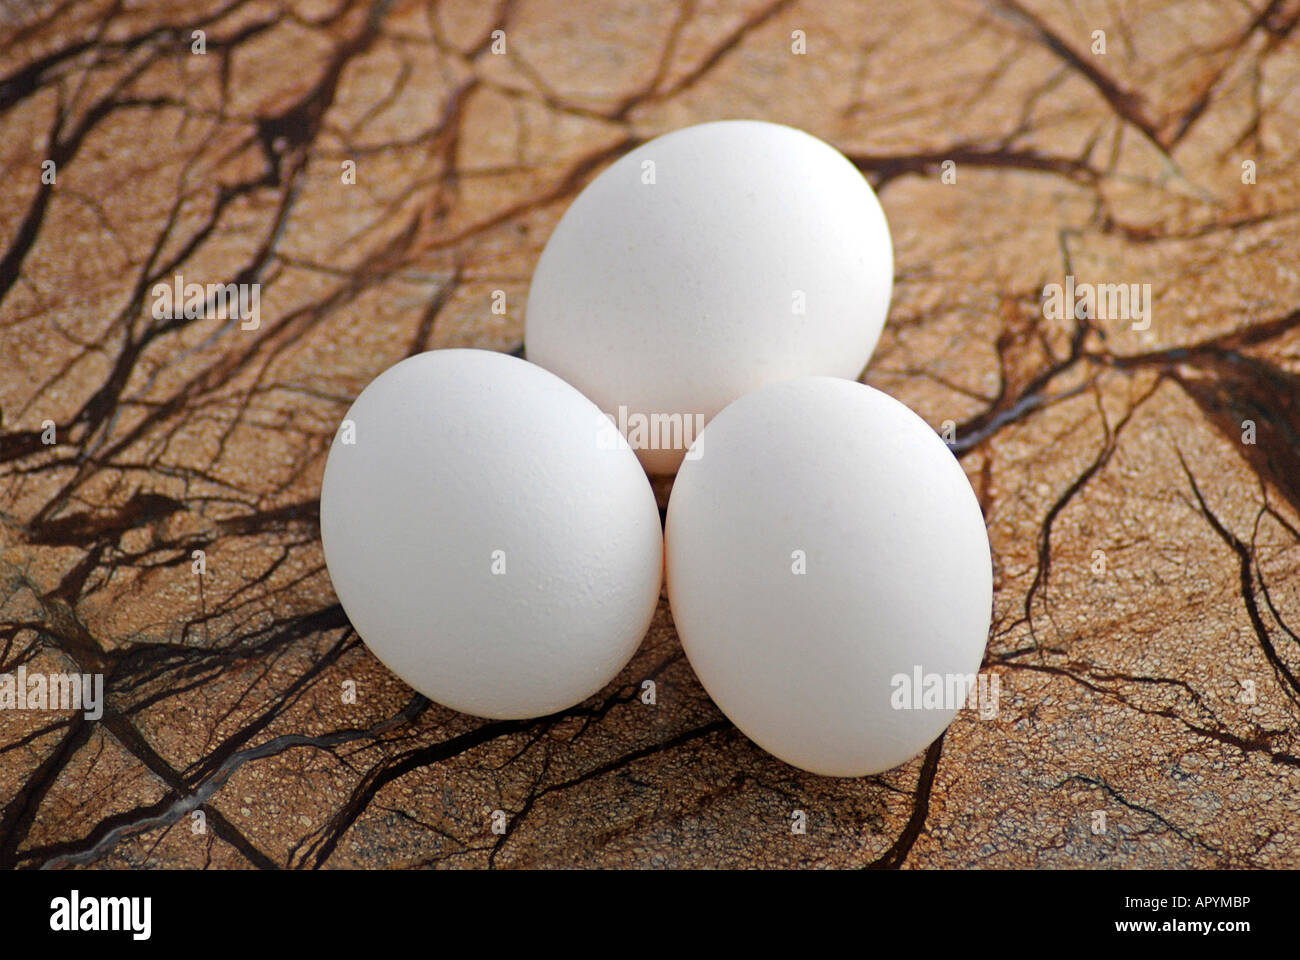 White Eggs on marble surface Stock Photo